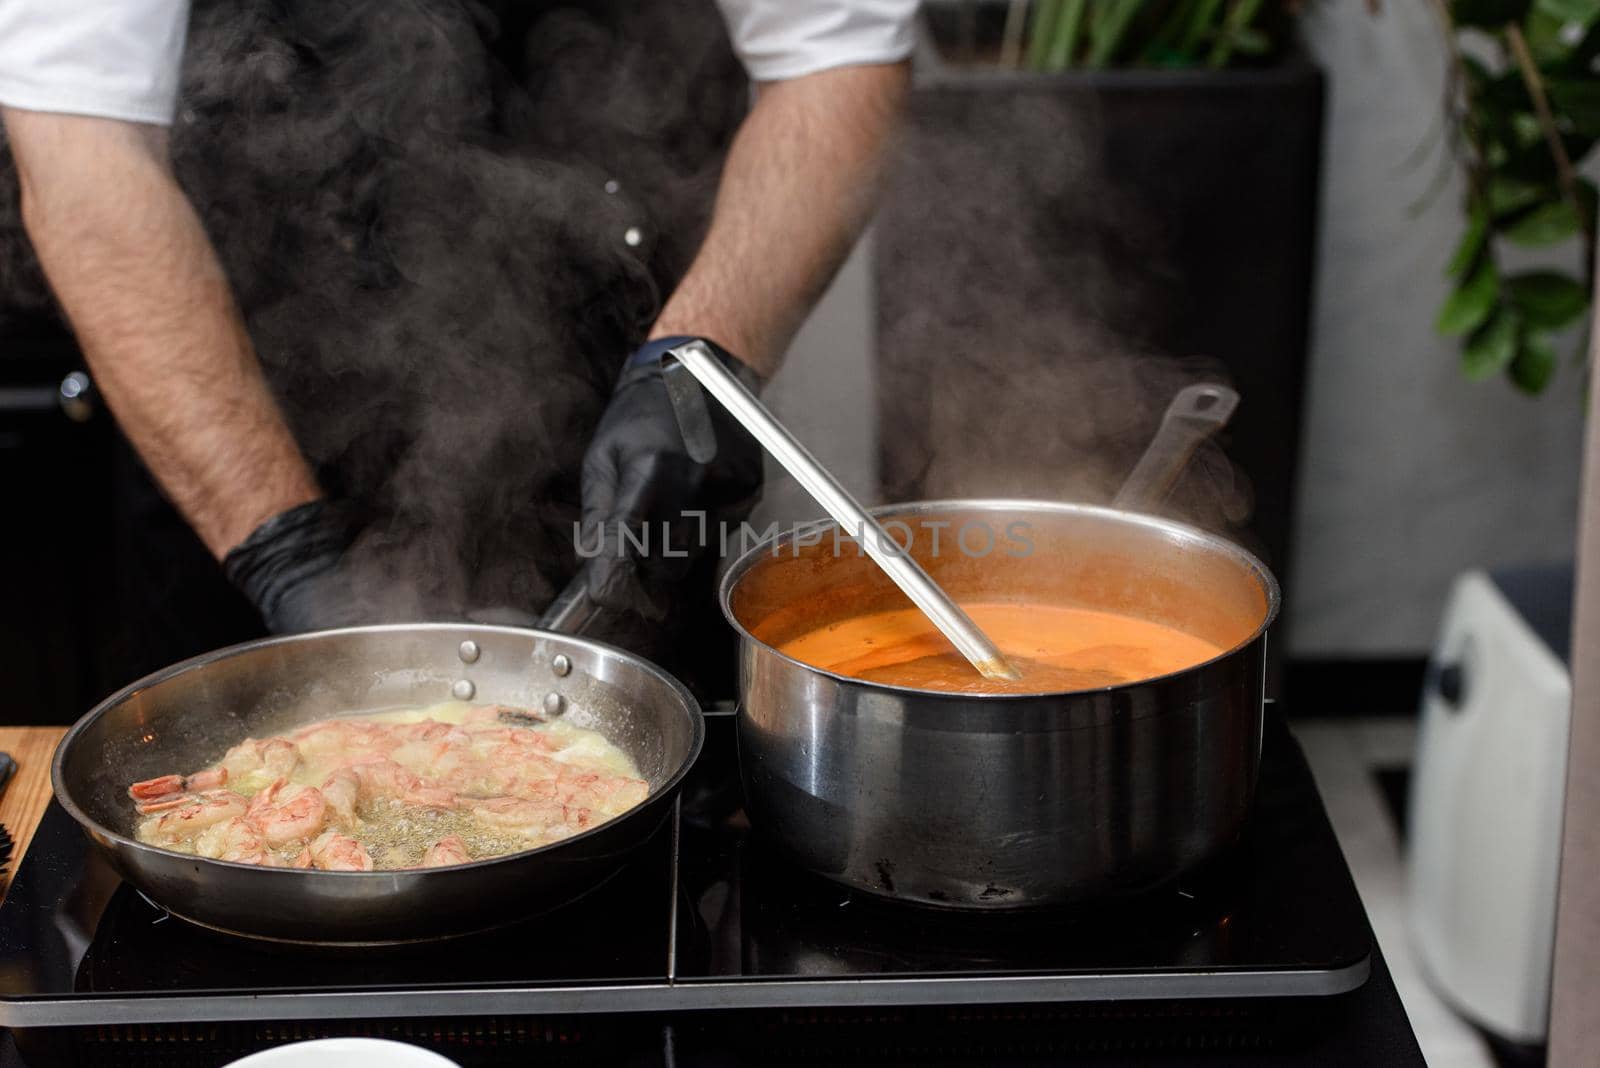 cooking process of Suquet de Peix soup with potatoes, herbs and fish with the addition of picada close-up in a saucepan on the table. horizontal